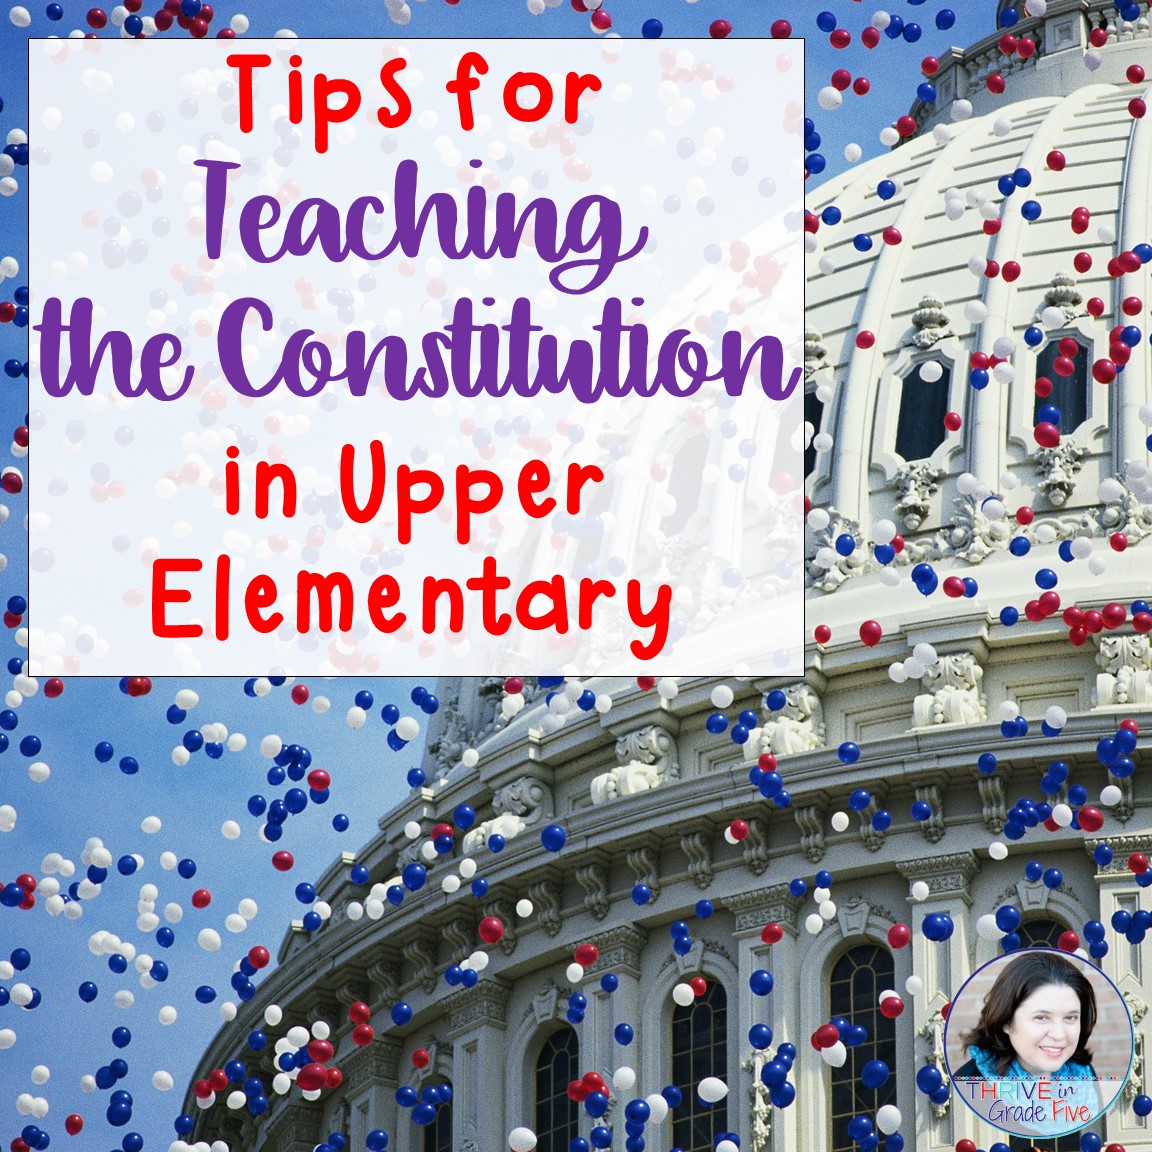 Tips for Teaching the Constitution in Upper Elementary